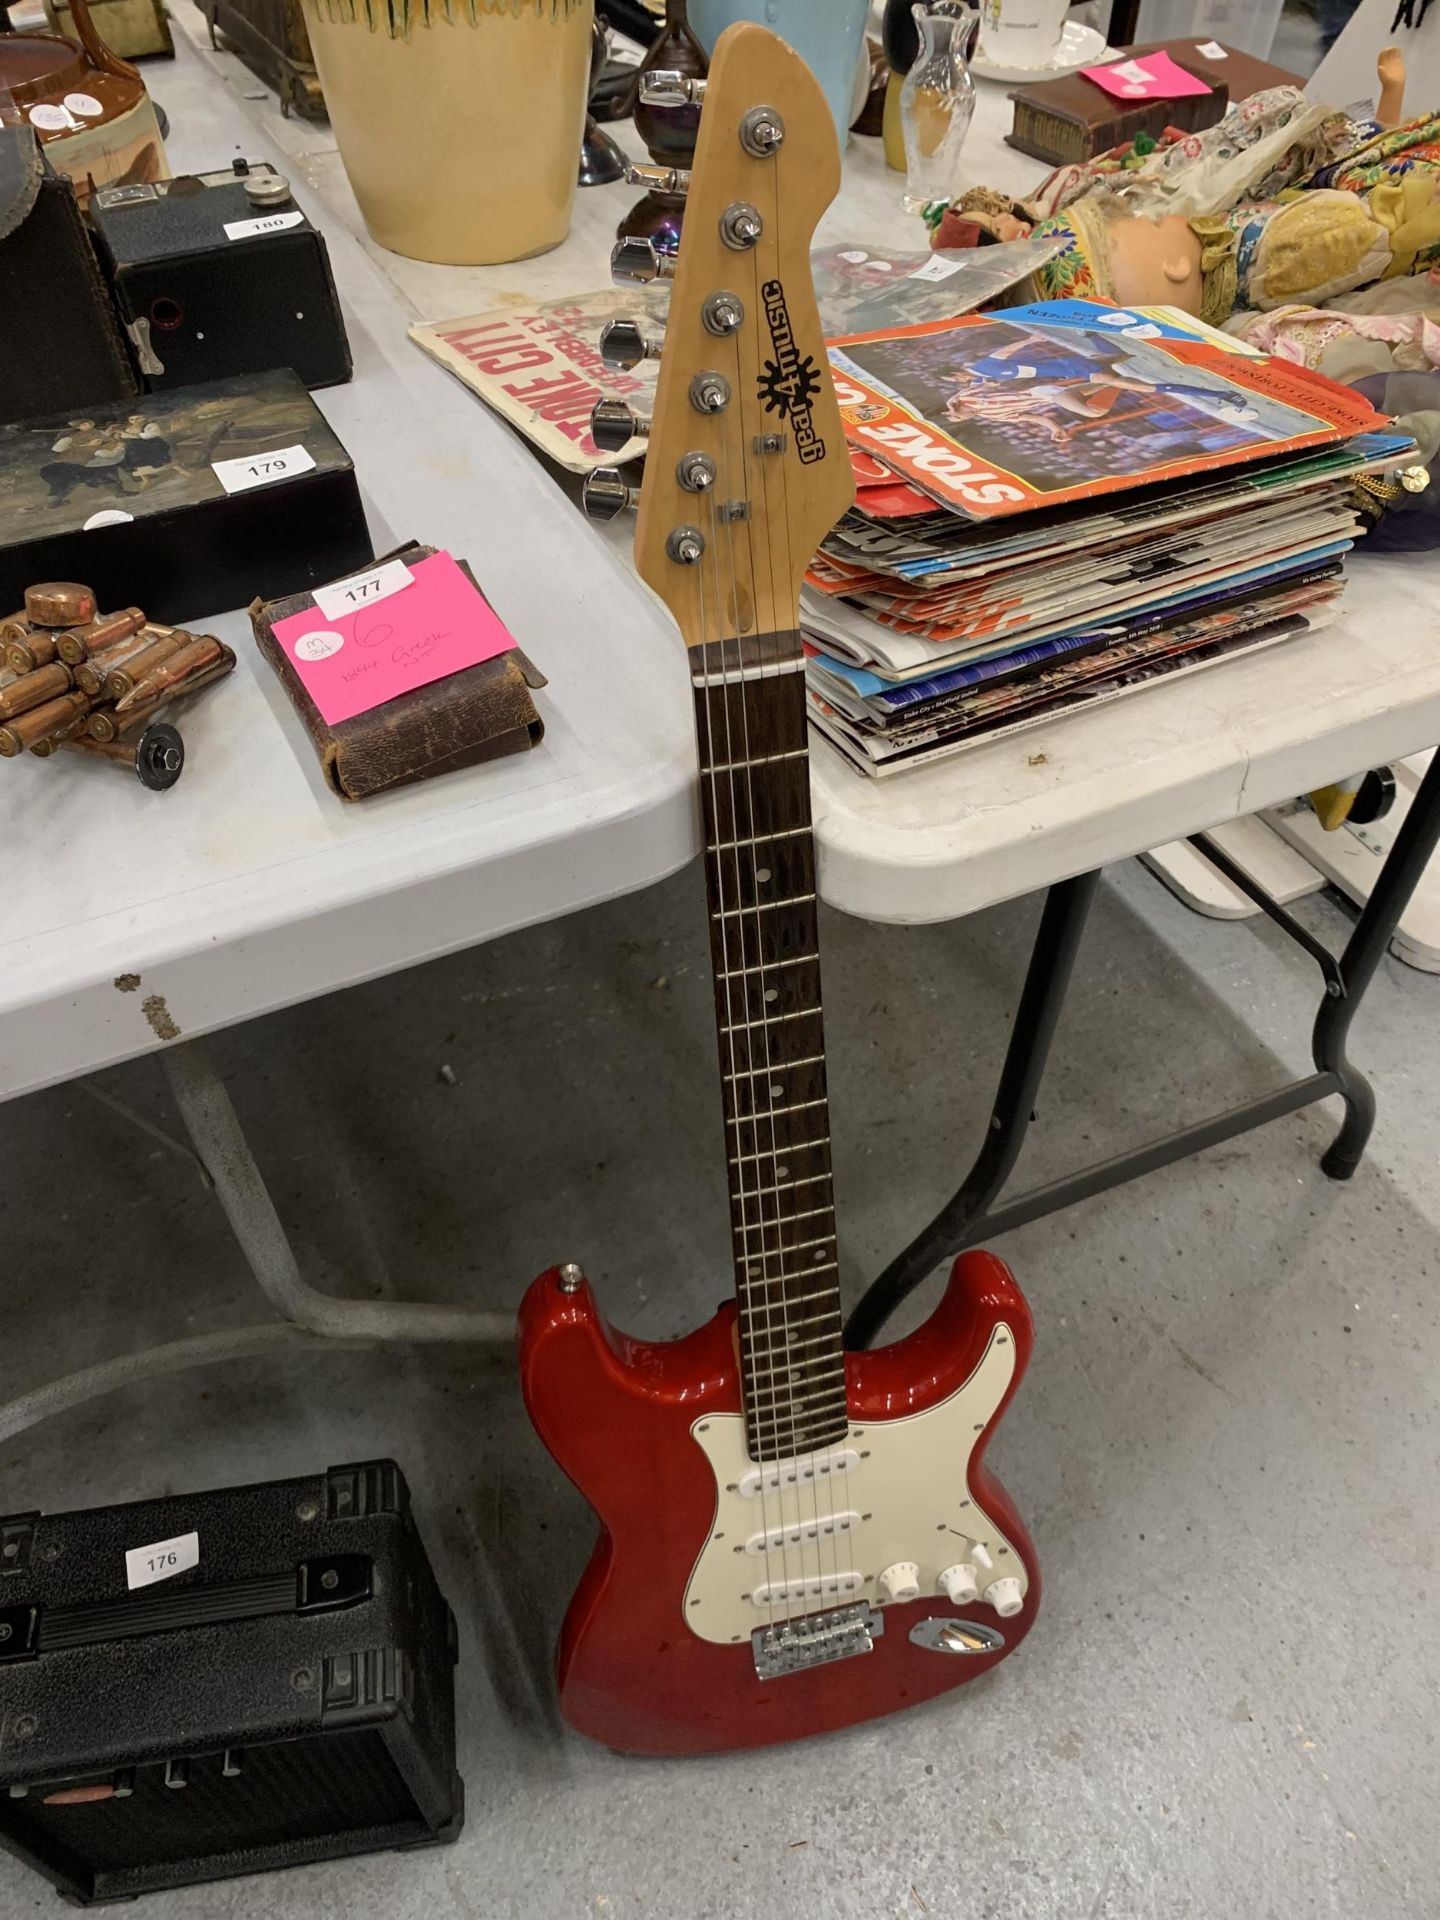 A 'GEAR4MUSIC' RED ELECTRIC GUITAR & A STAGG ELECTRIC AMPLIFIER